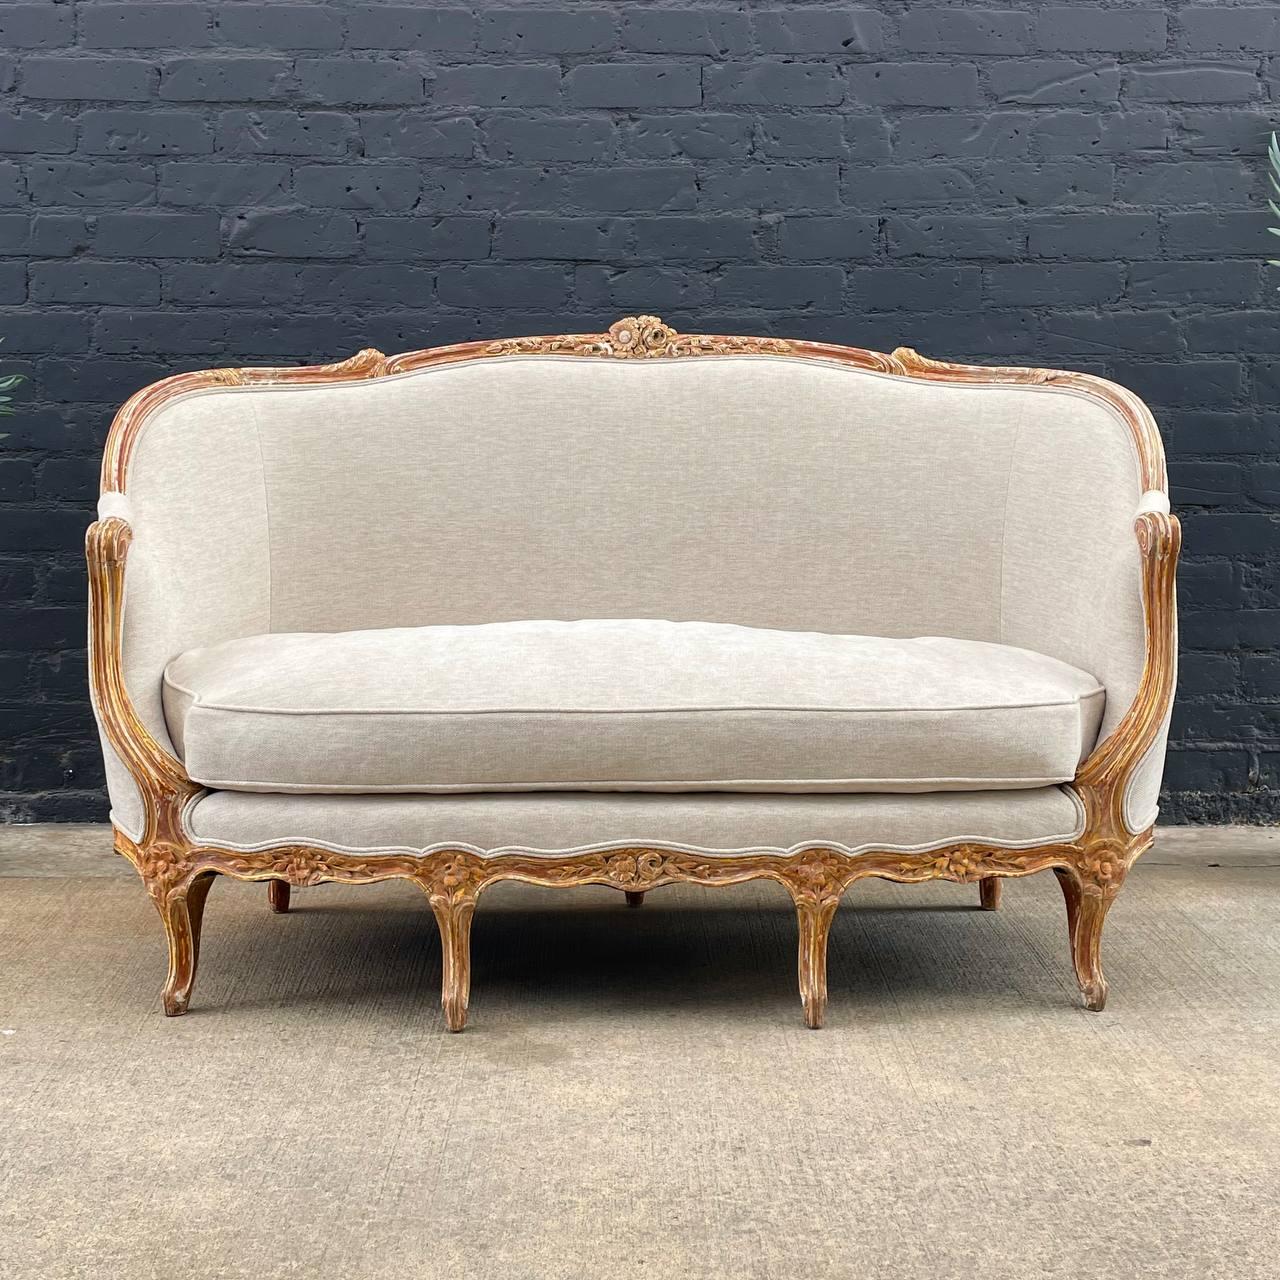 Antique French Louis XVI Sofa with Carved Details

Country: France
Materials: Carved giltwood, Alpaca Mohair 
Condition: Newly Reupholstered
Style: French Louis XVI 
Year: 1920s

$8,900

Dimensions:
40.50”H x 65”W x 29”D
Seat Height 20”.